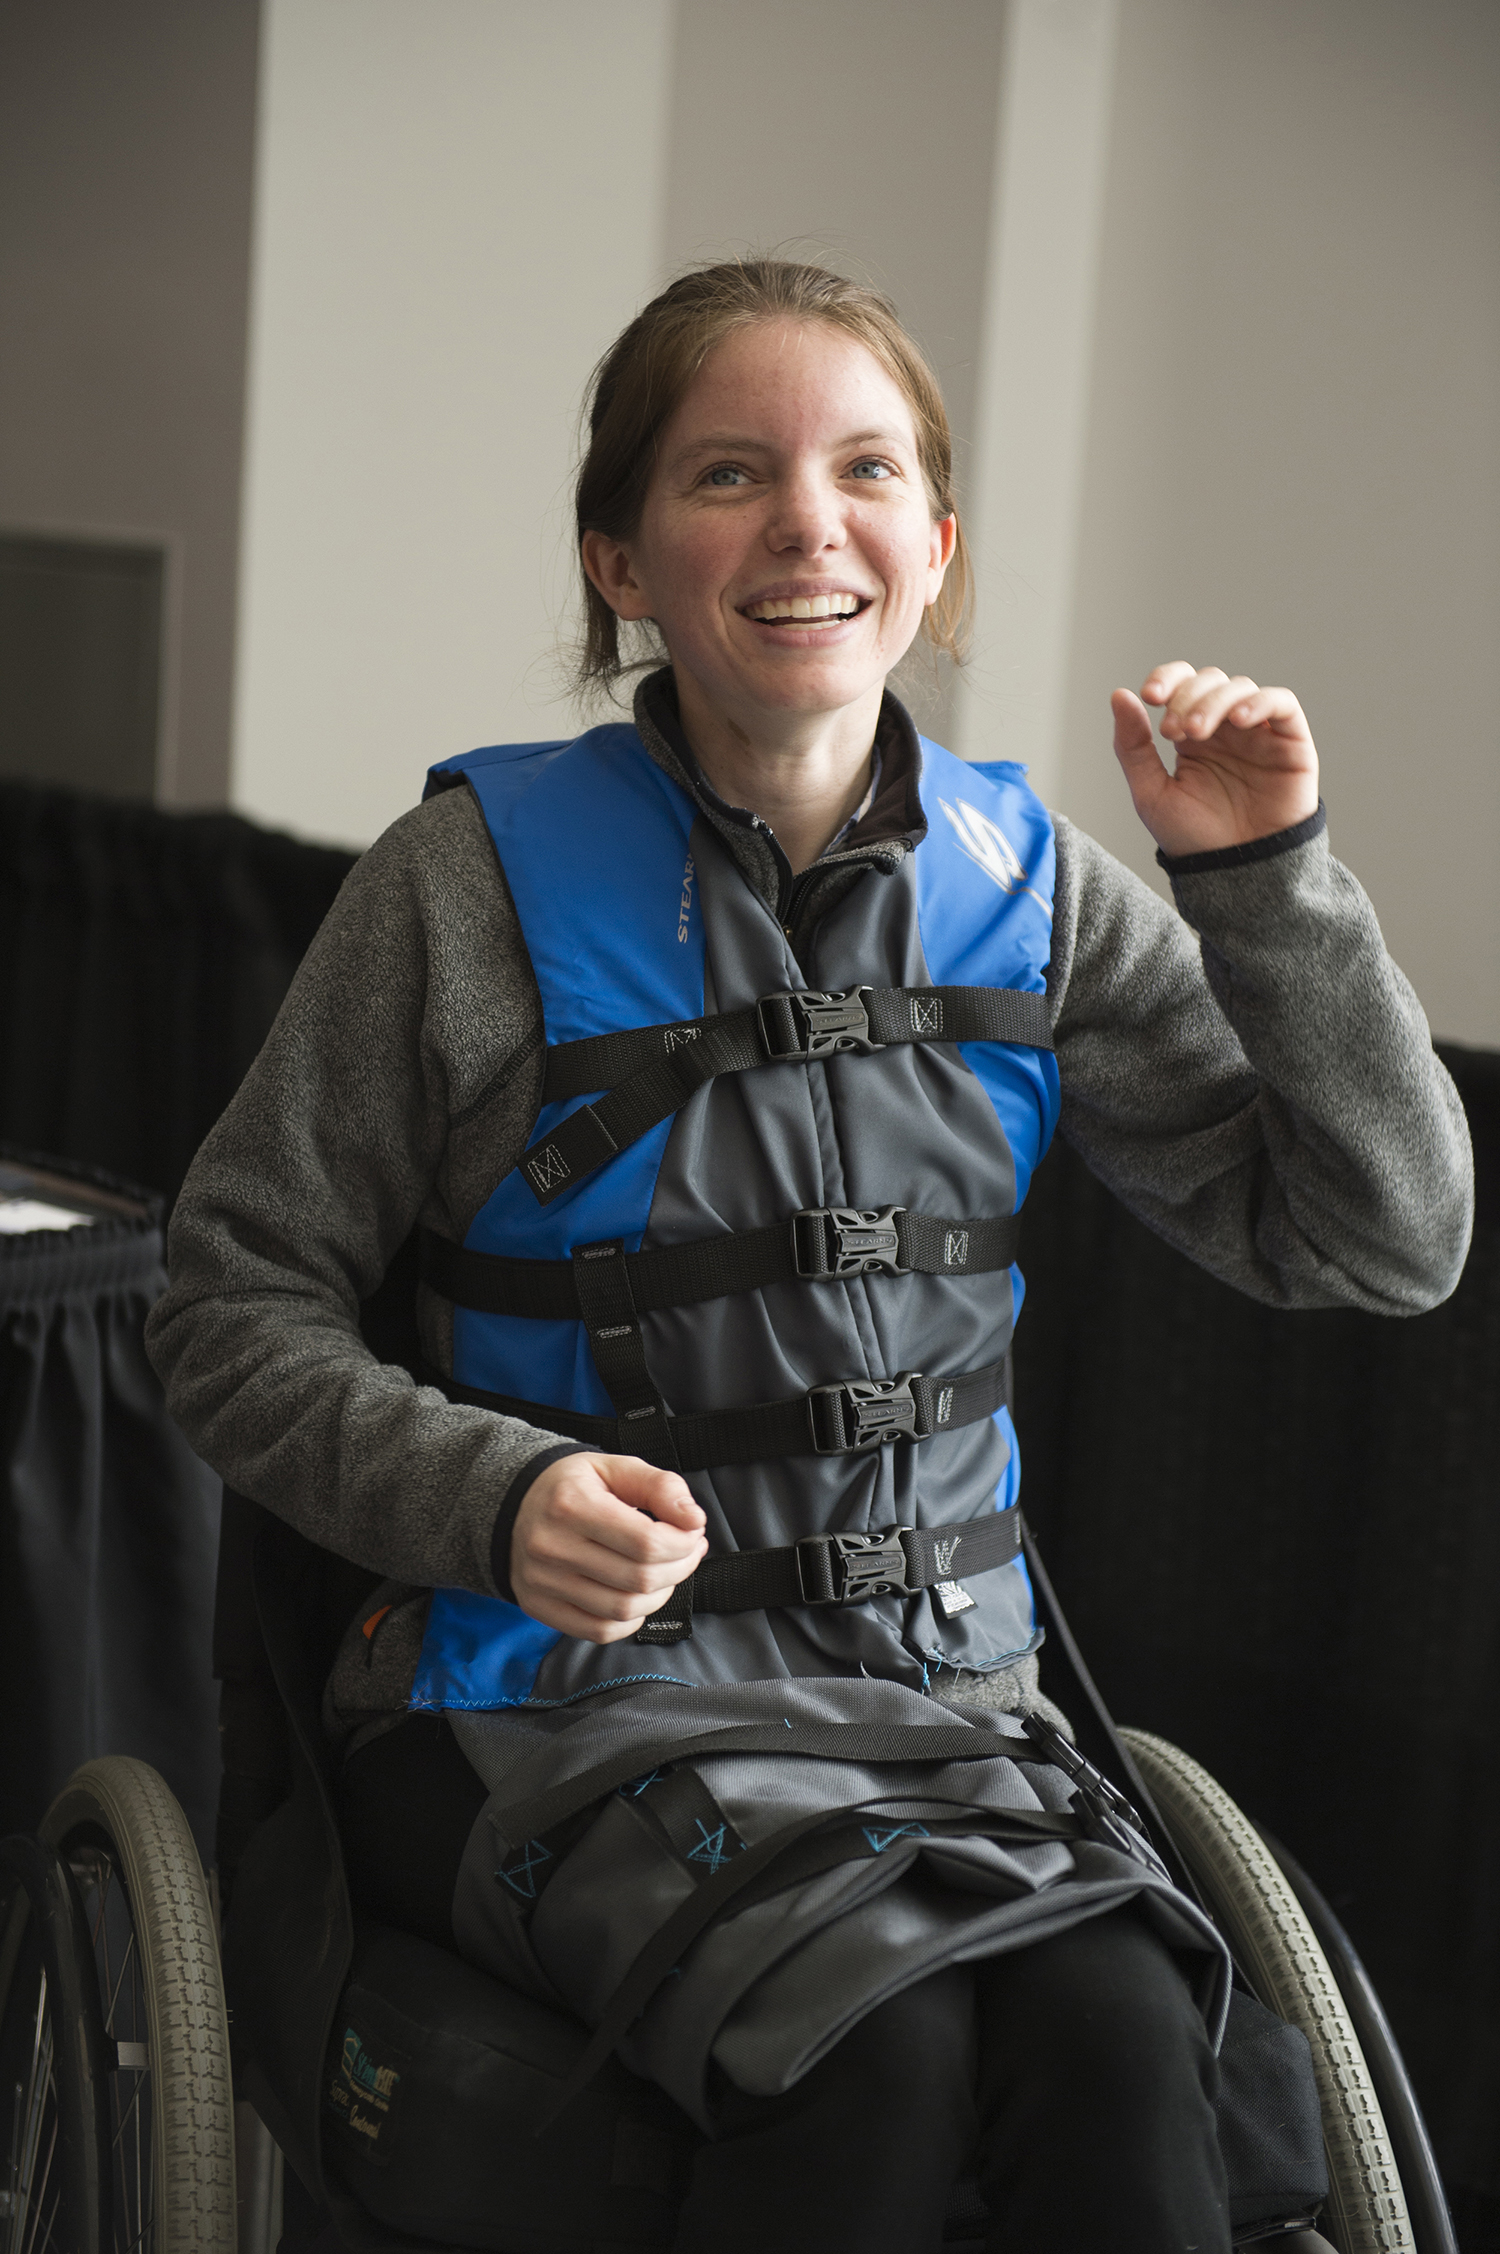 Ana Sorensen models the harness that is part of the transfer system.